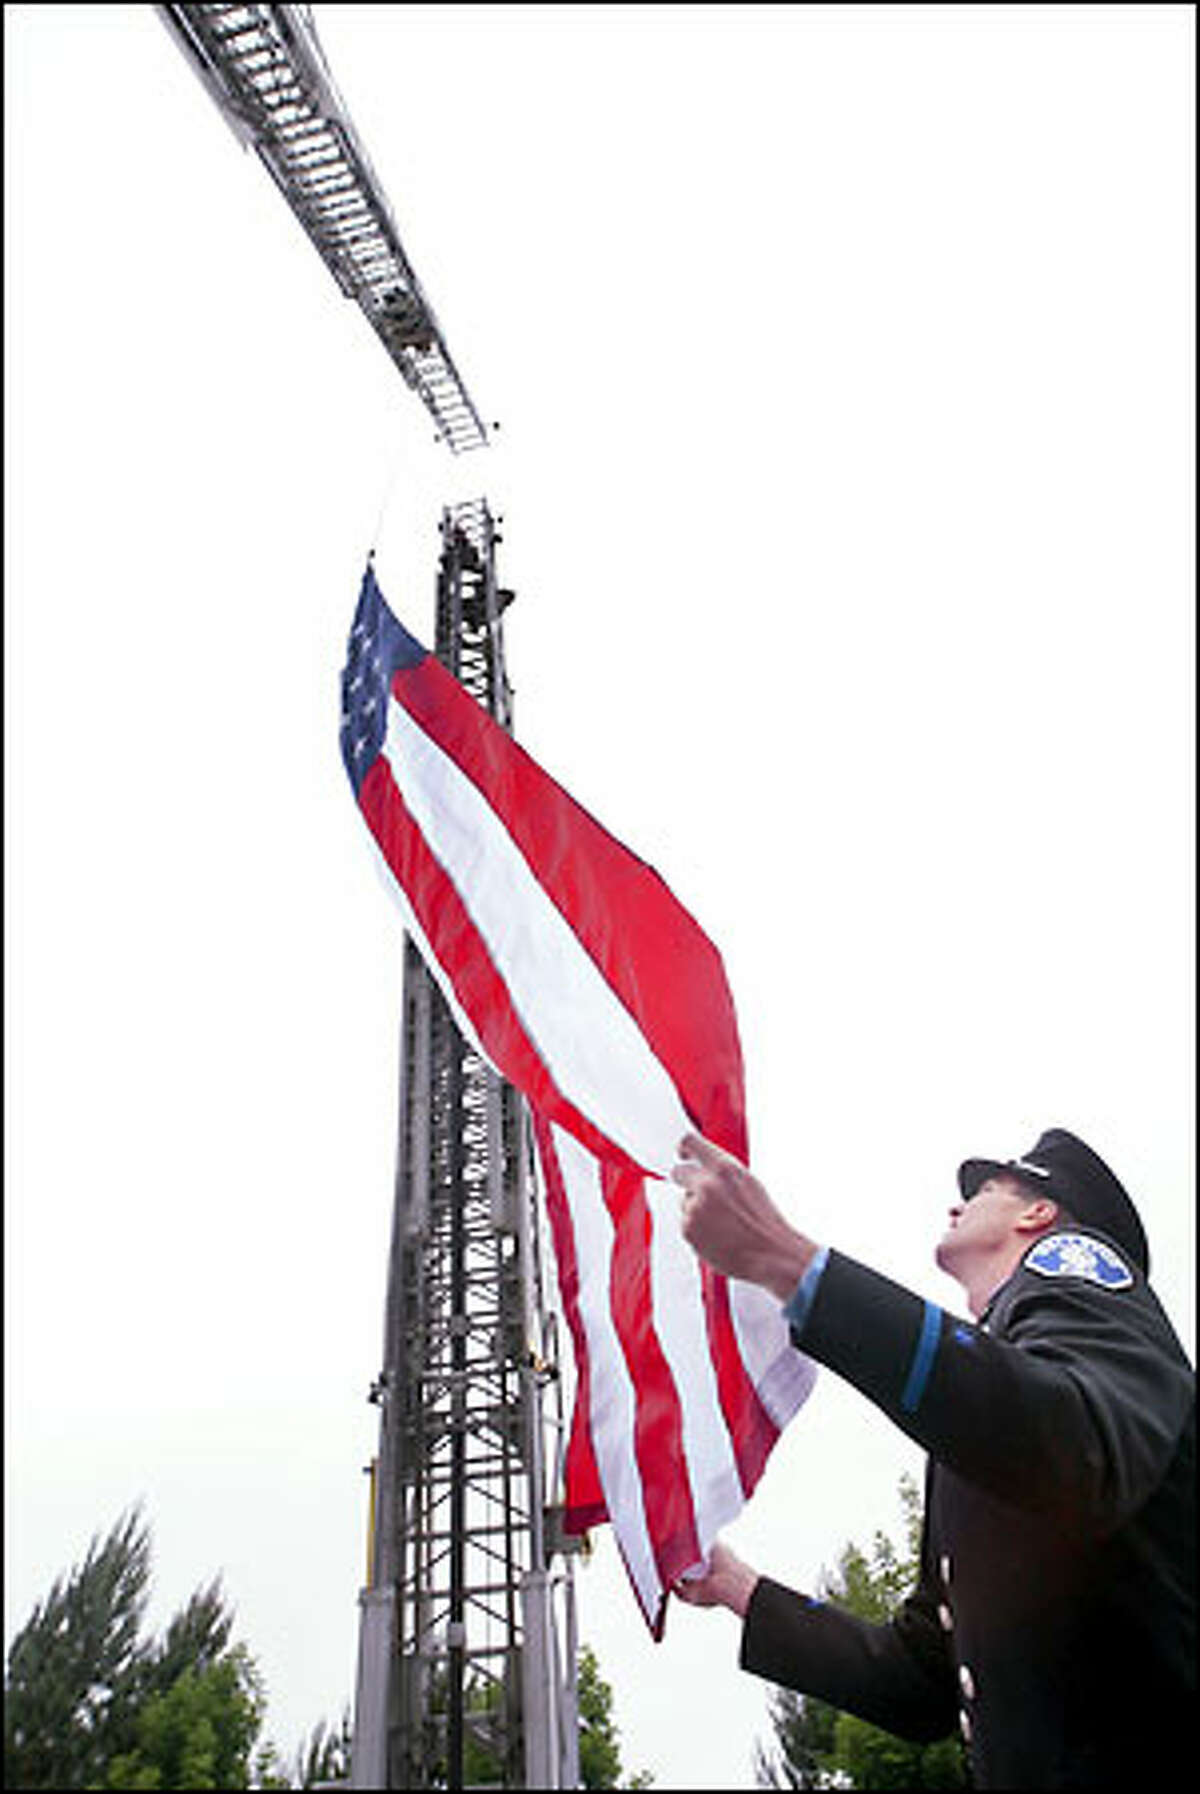 Bellevue firefighter John Harn unfurls a flag as it's raised between the extended ladders of two fire trucks at the scene where Deputy Richard Herzog was slain. A motorcade of hundreds of police cars, ambulances and fire trucks passed under the flag in Herzog's honor.